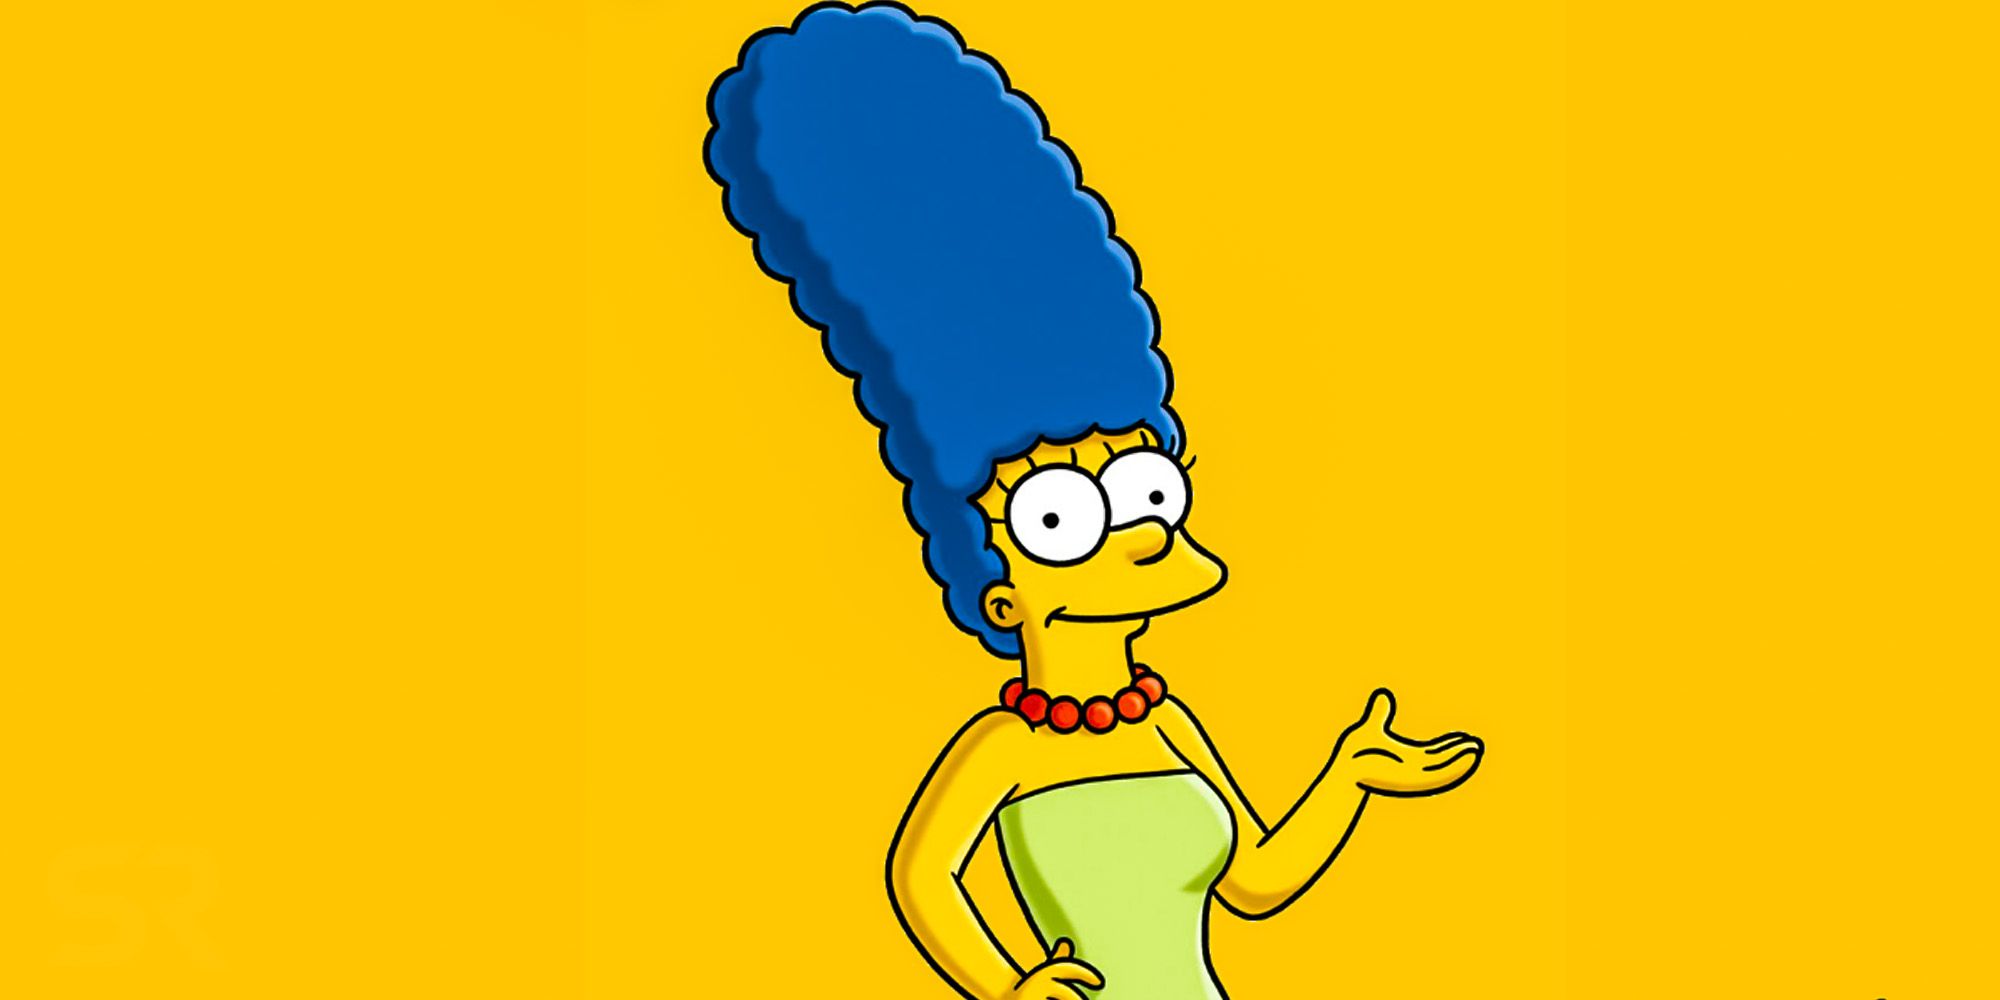 "Did you lose a bet or are you just trying to be the next Marge Simpson?" - wide 5